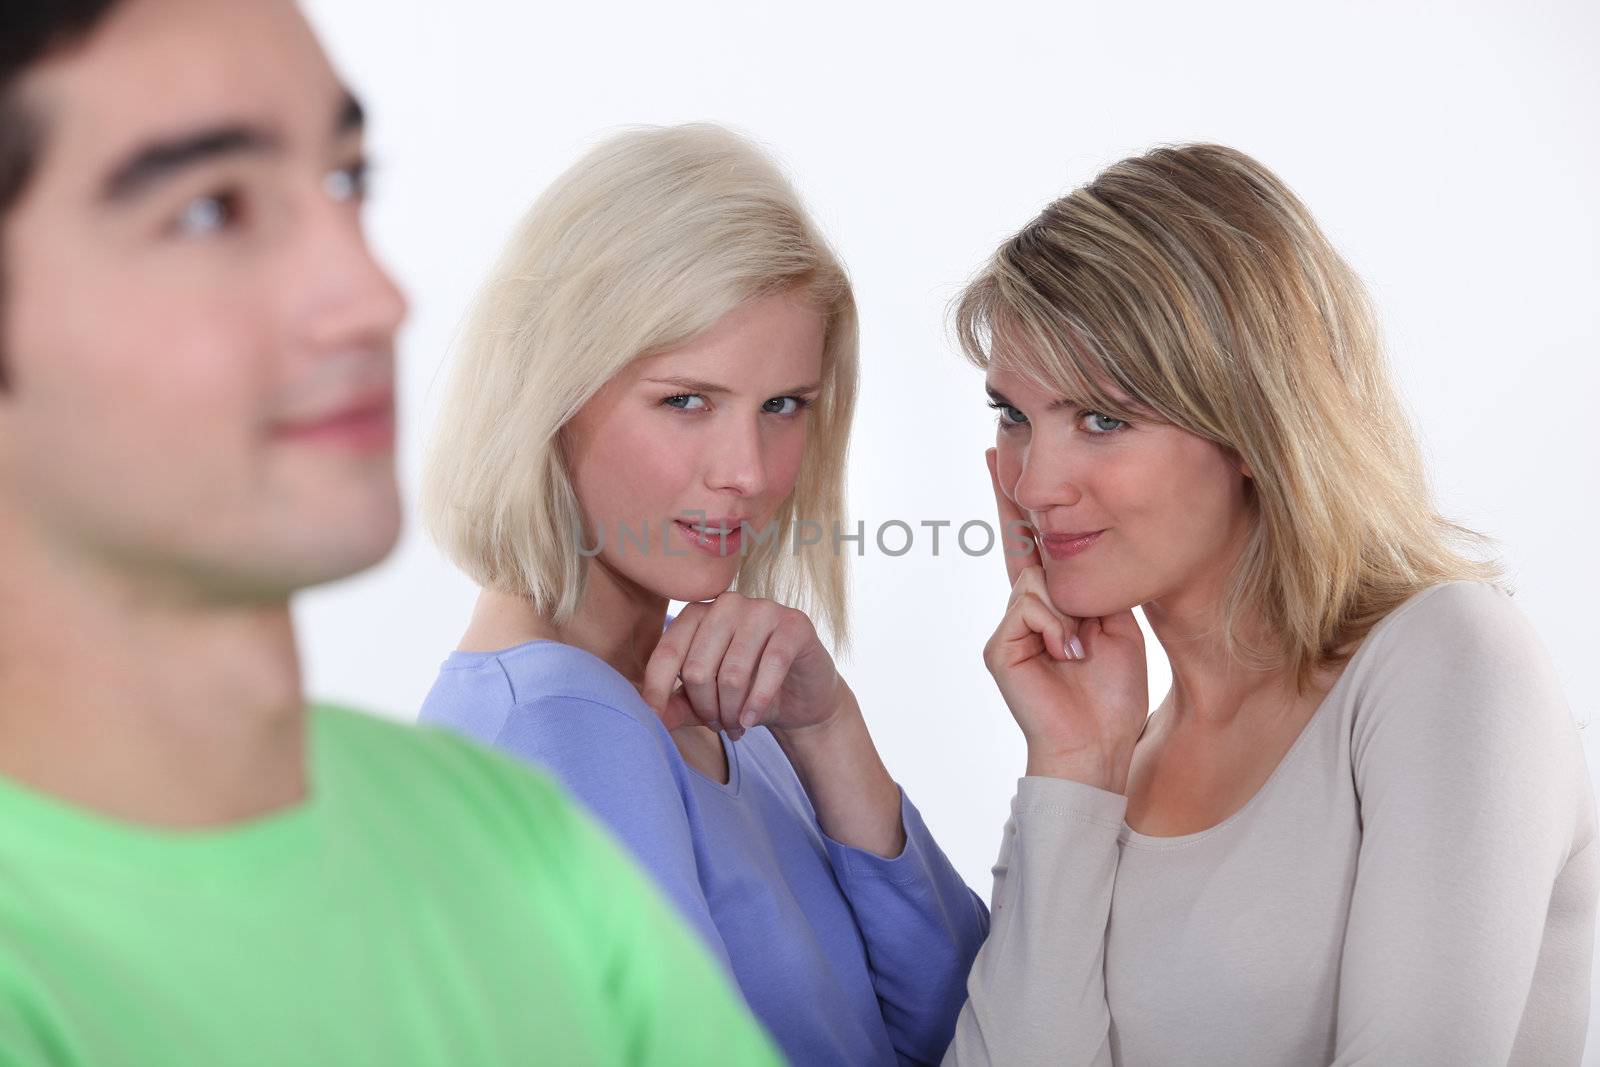 Young women observing a man by phovoir